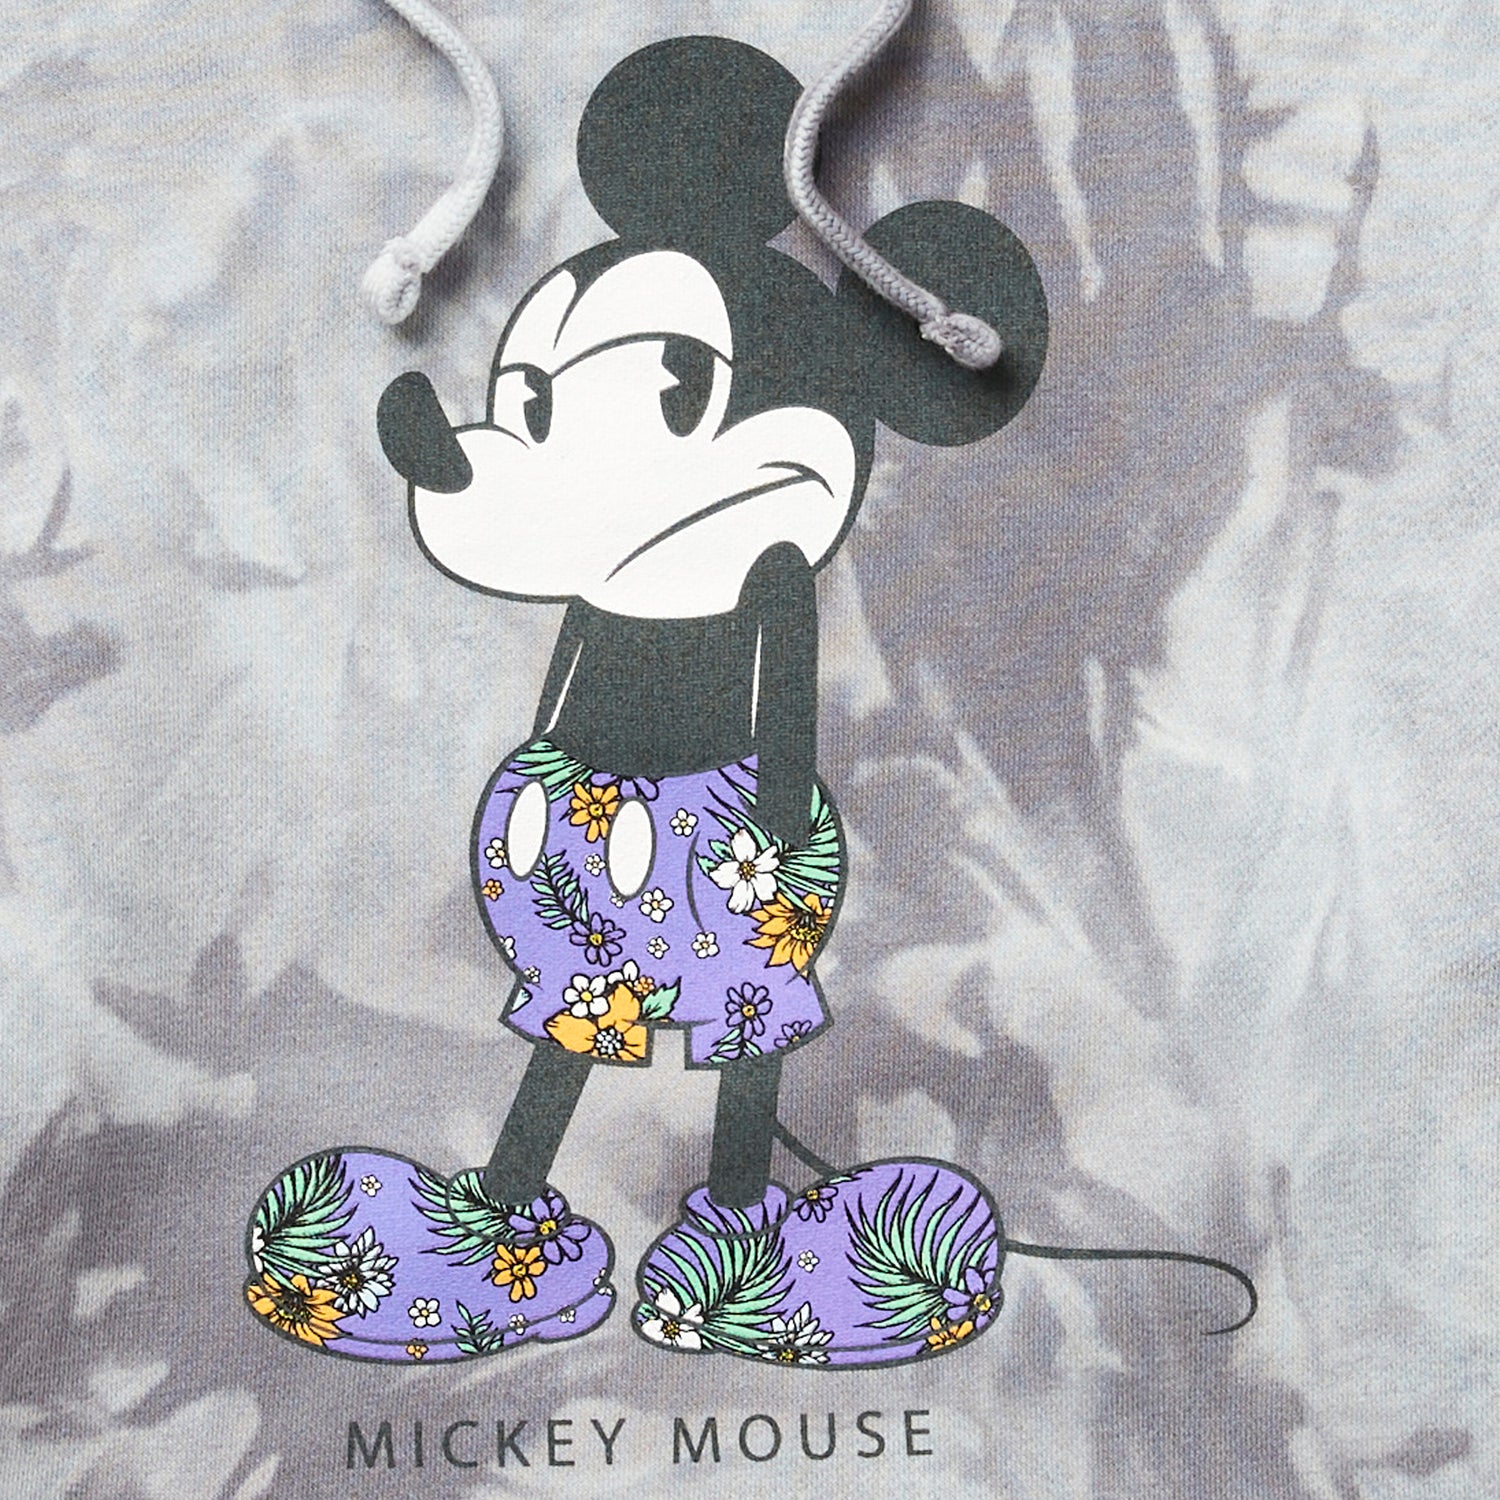 MICKEY MOUSE STIGMA PULLOVER HOODIE - GREY TIE DYE